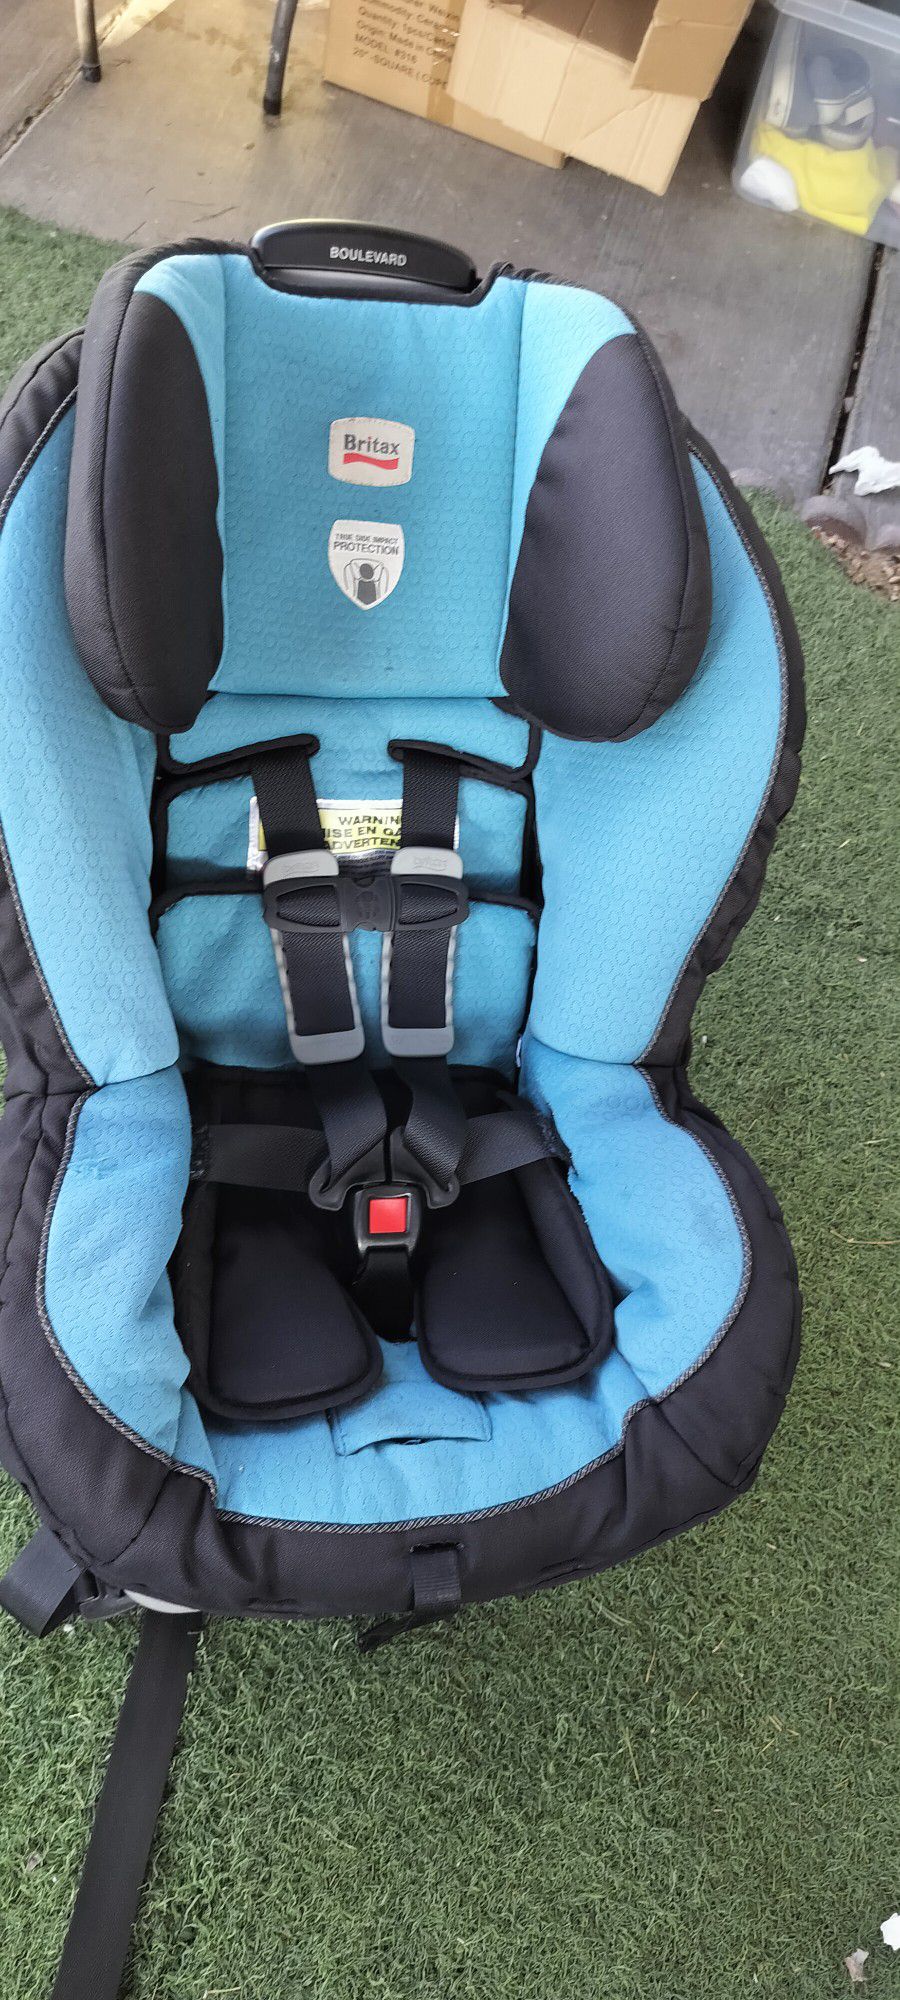 Car seat For Baby Or Toddler  $25 Pick Up only Bonanza and Lamb 